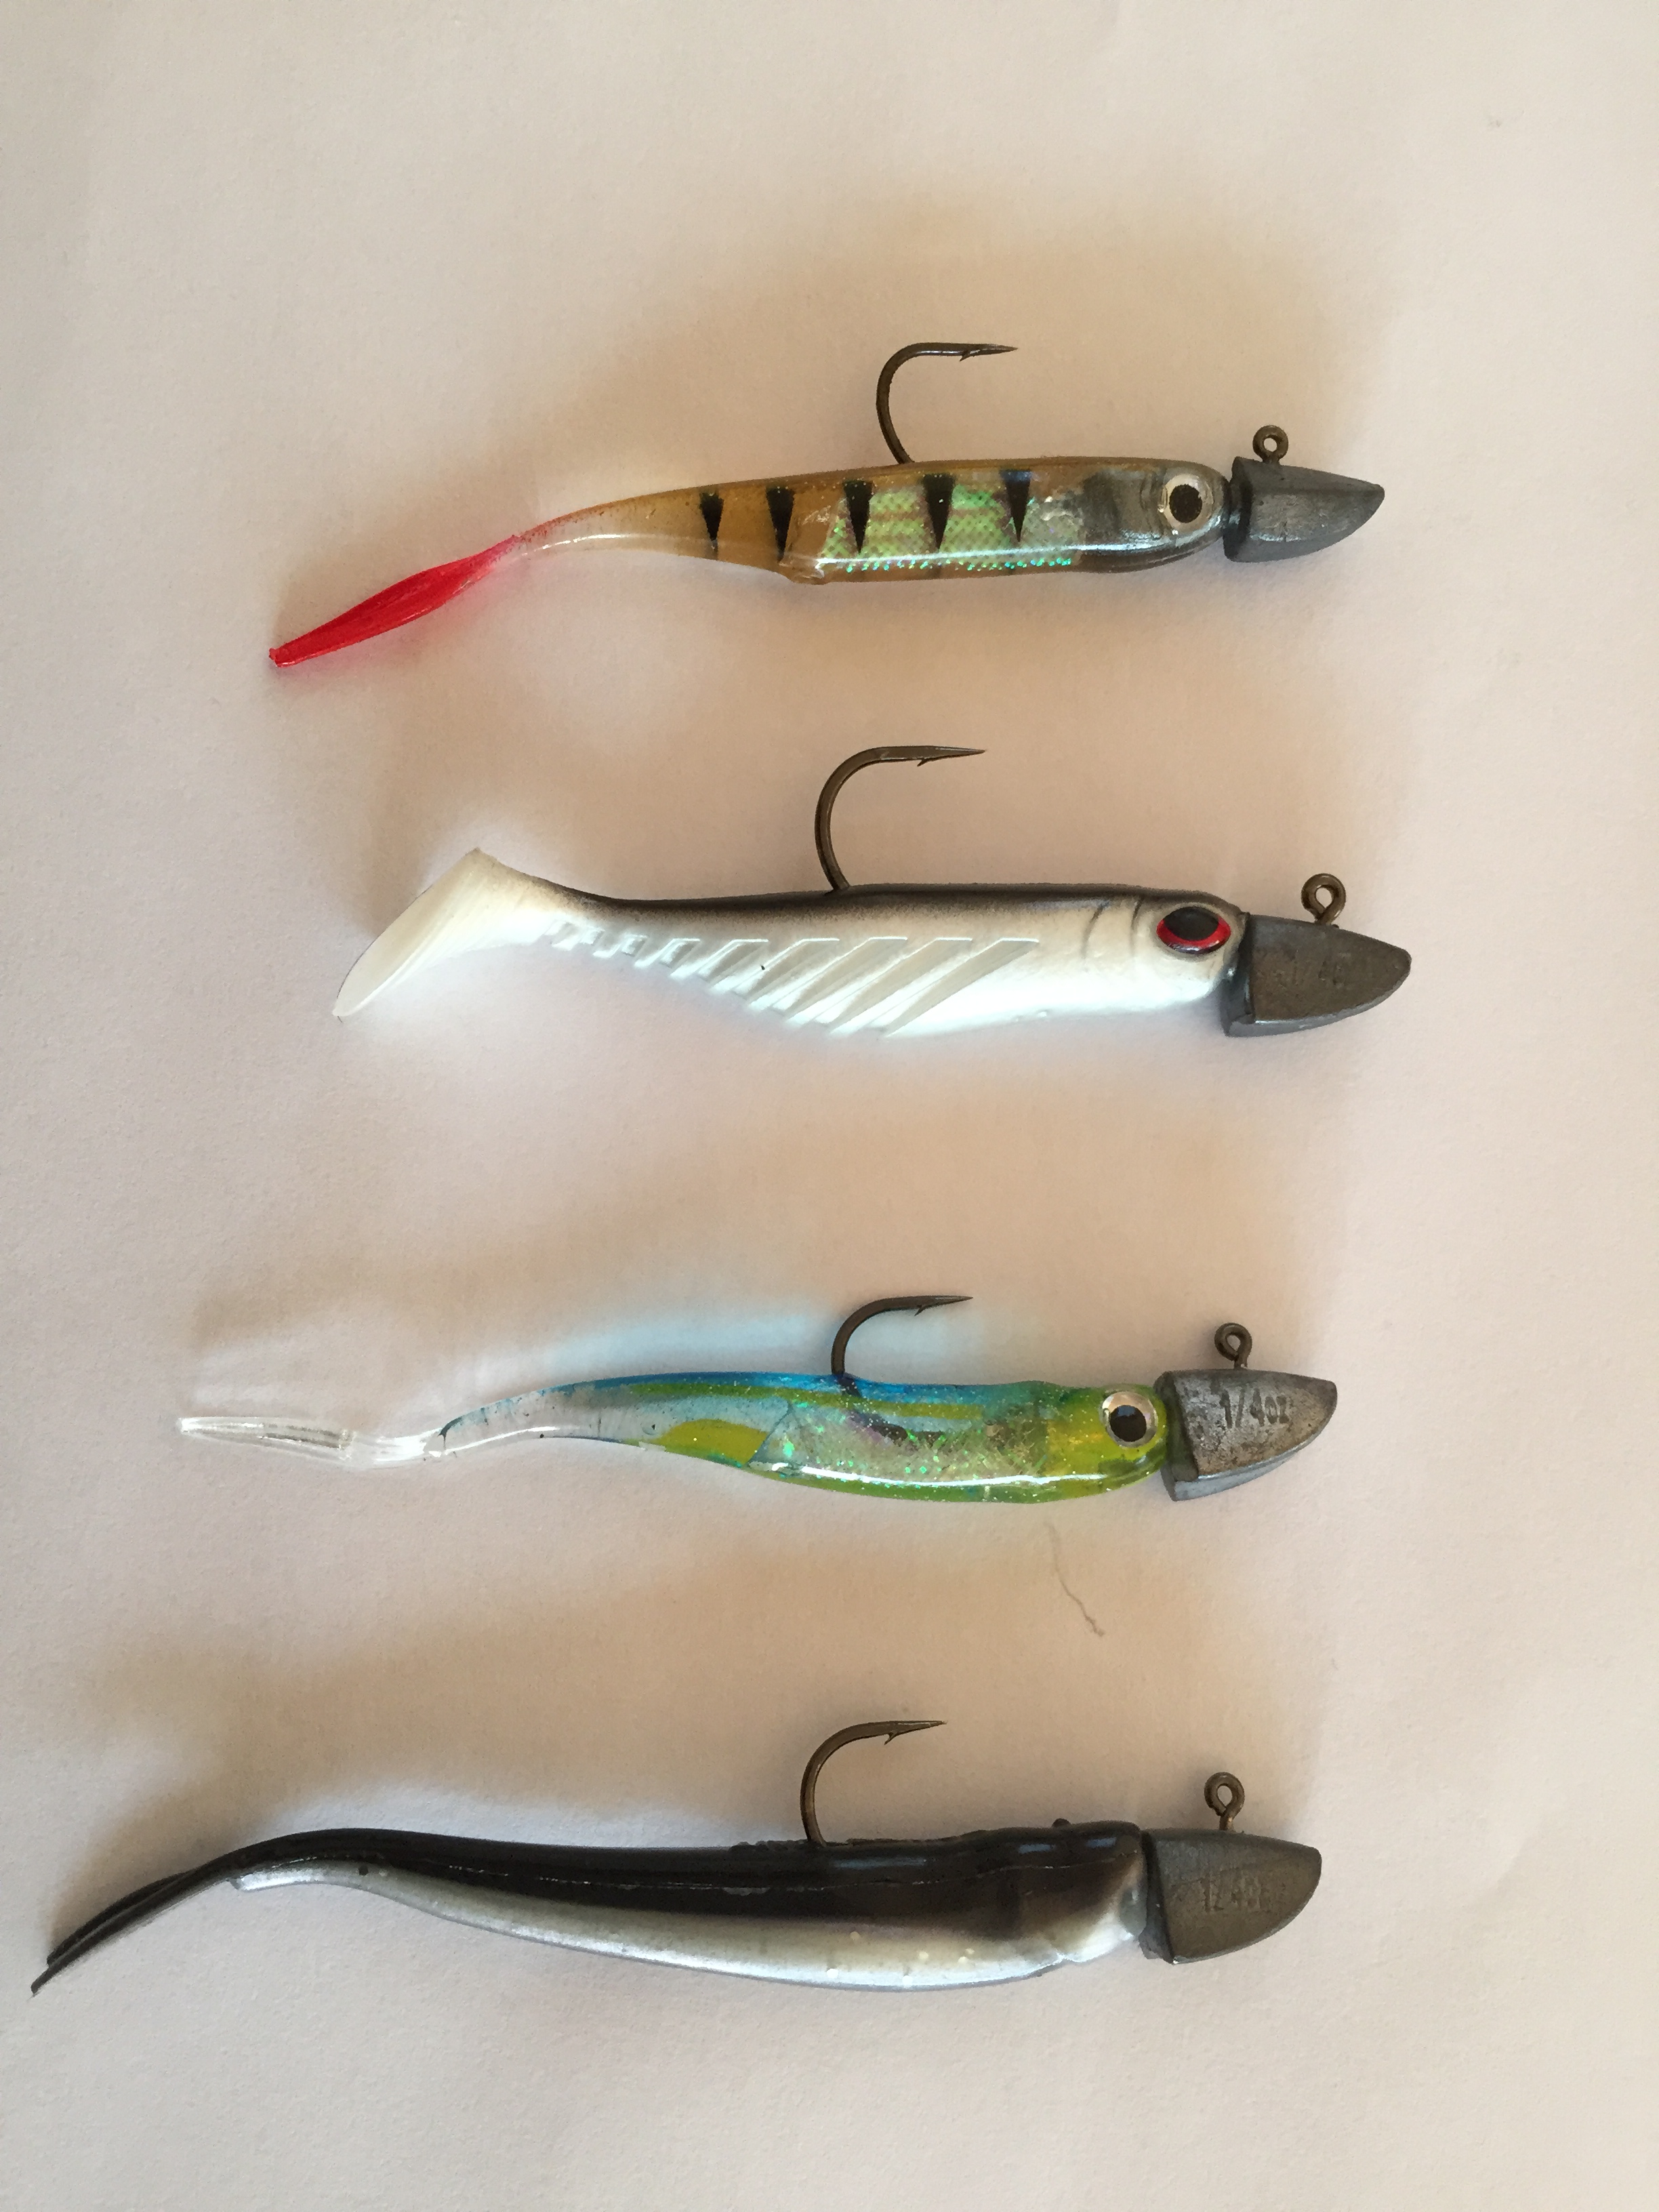 ARE SOFT BODIED LURES MORE EFFECTIVE THAN BAIT?